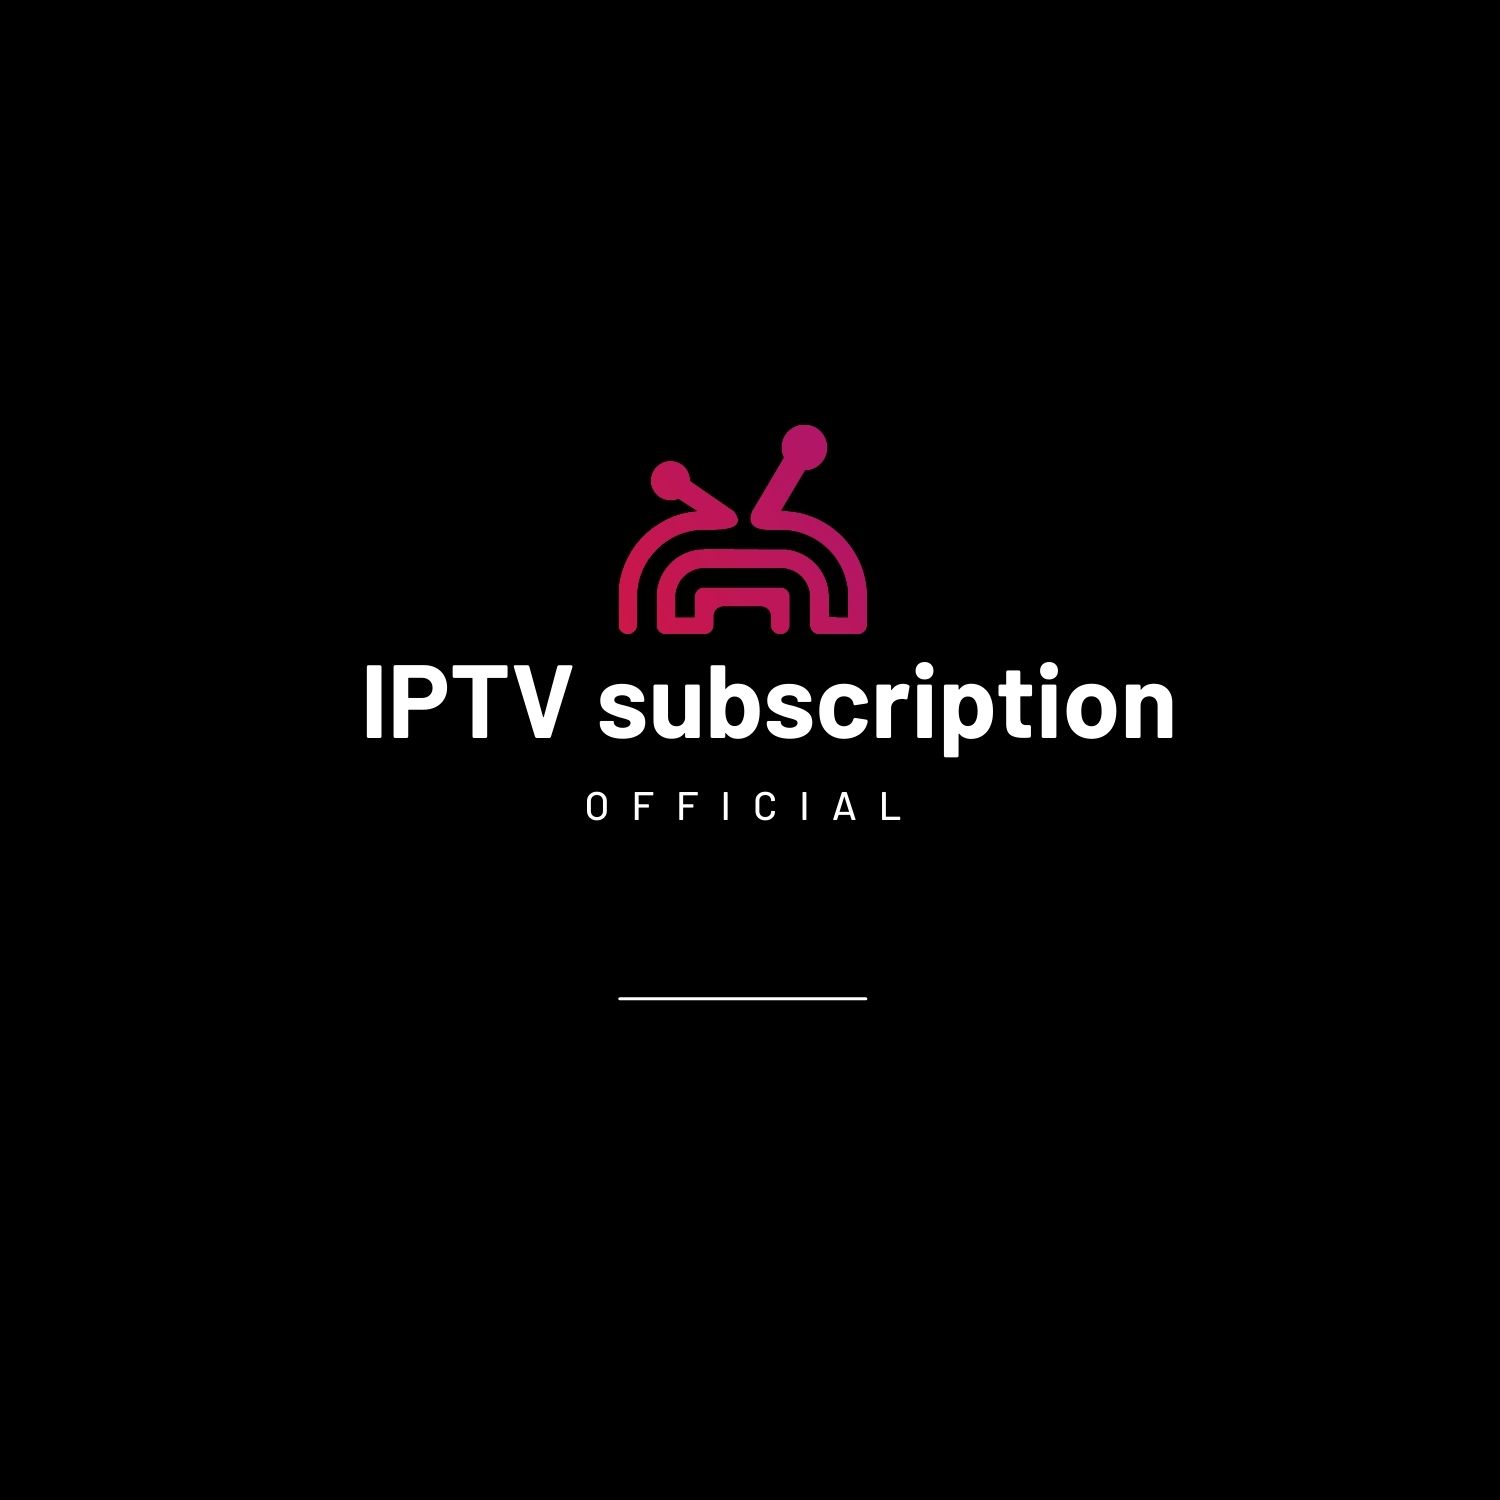 OFFICIAL IPTV